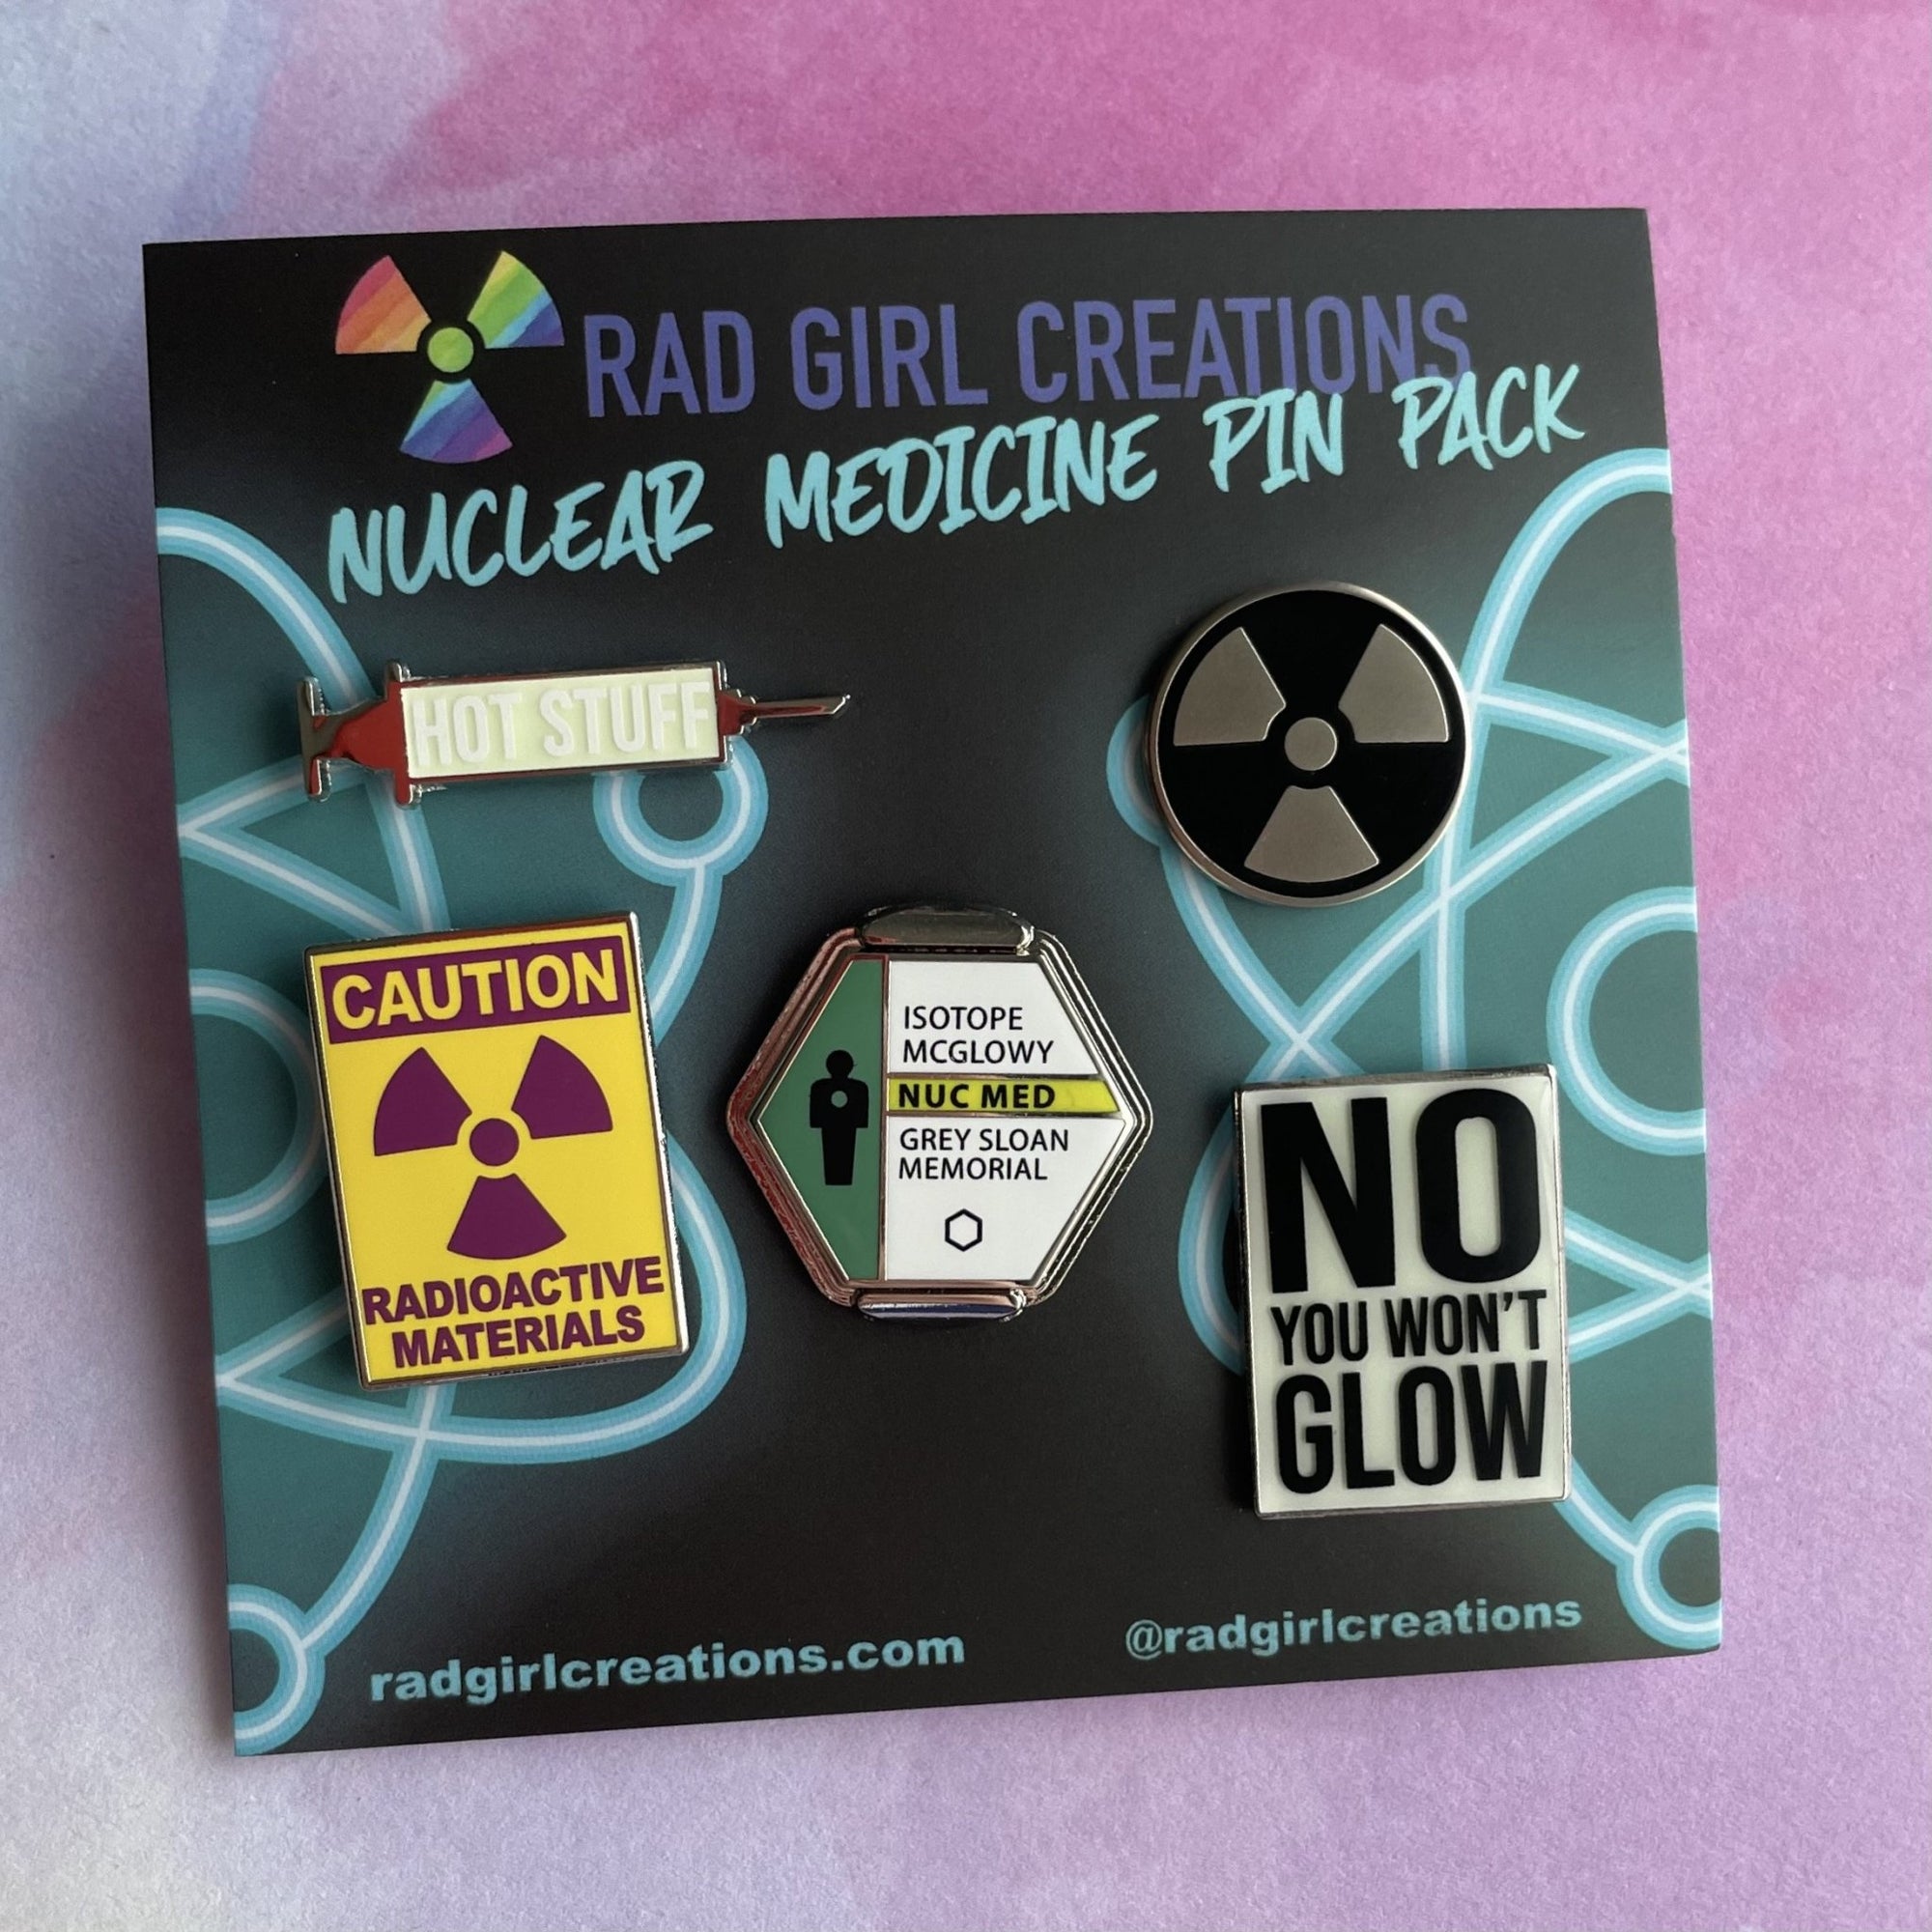 Nuclear Medicine Pin Pack - Rad Girl Creations